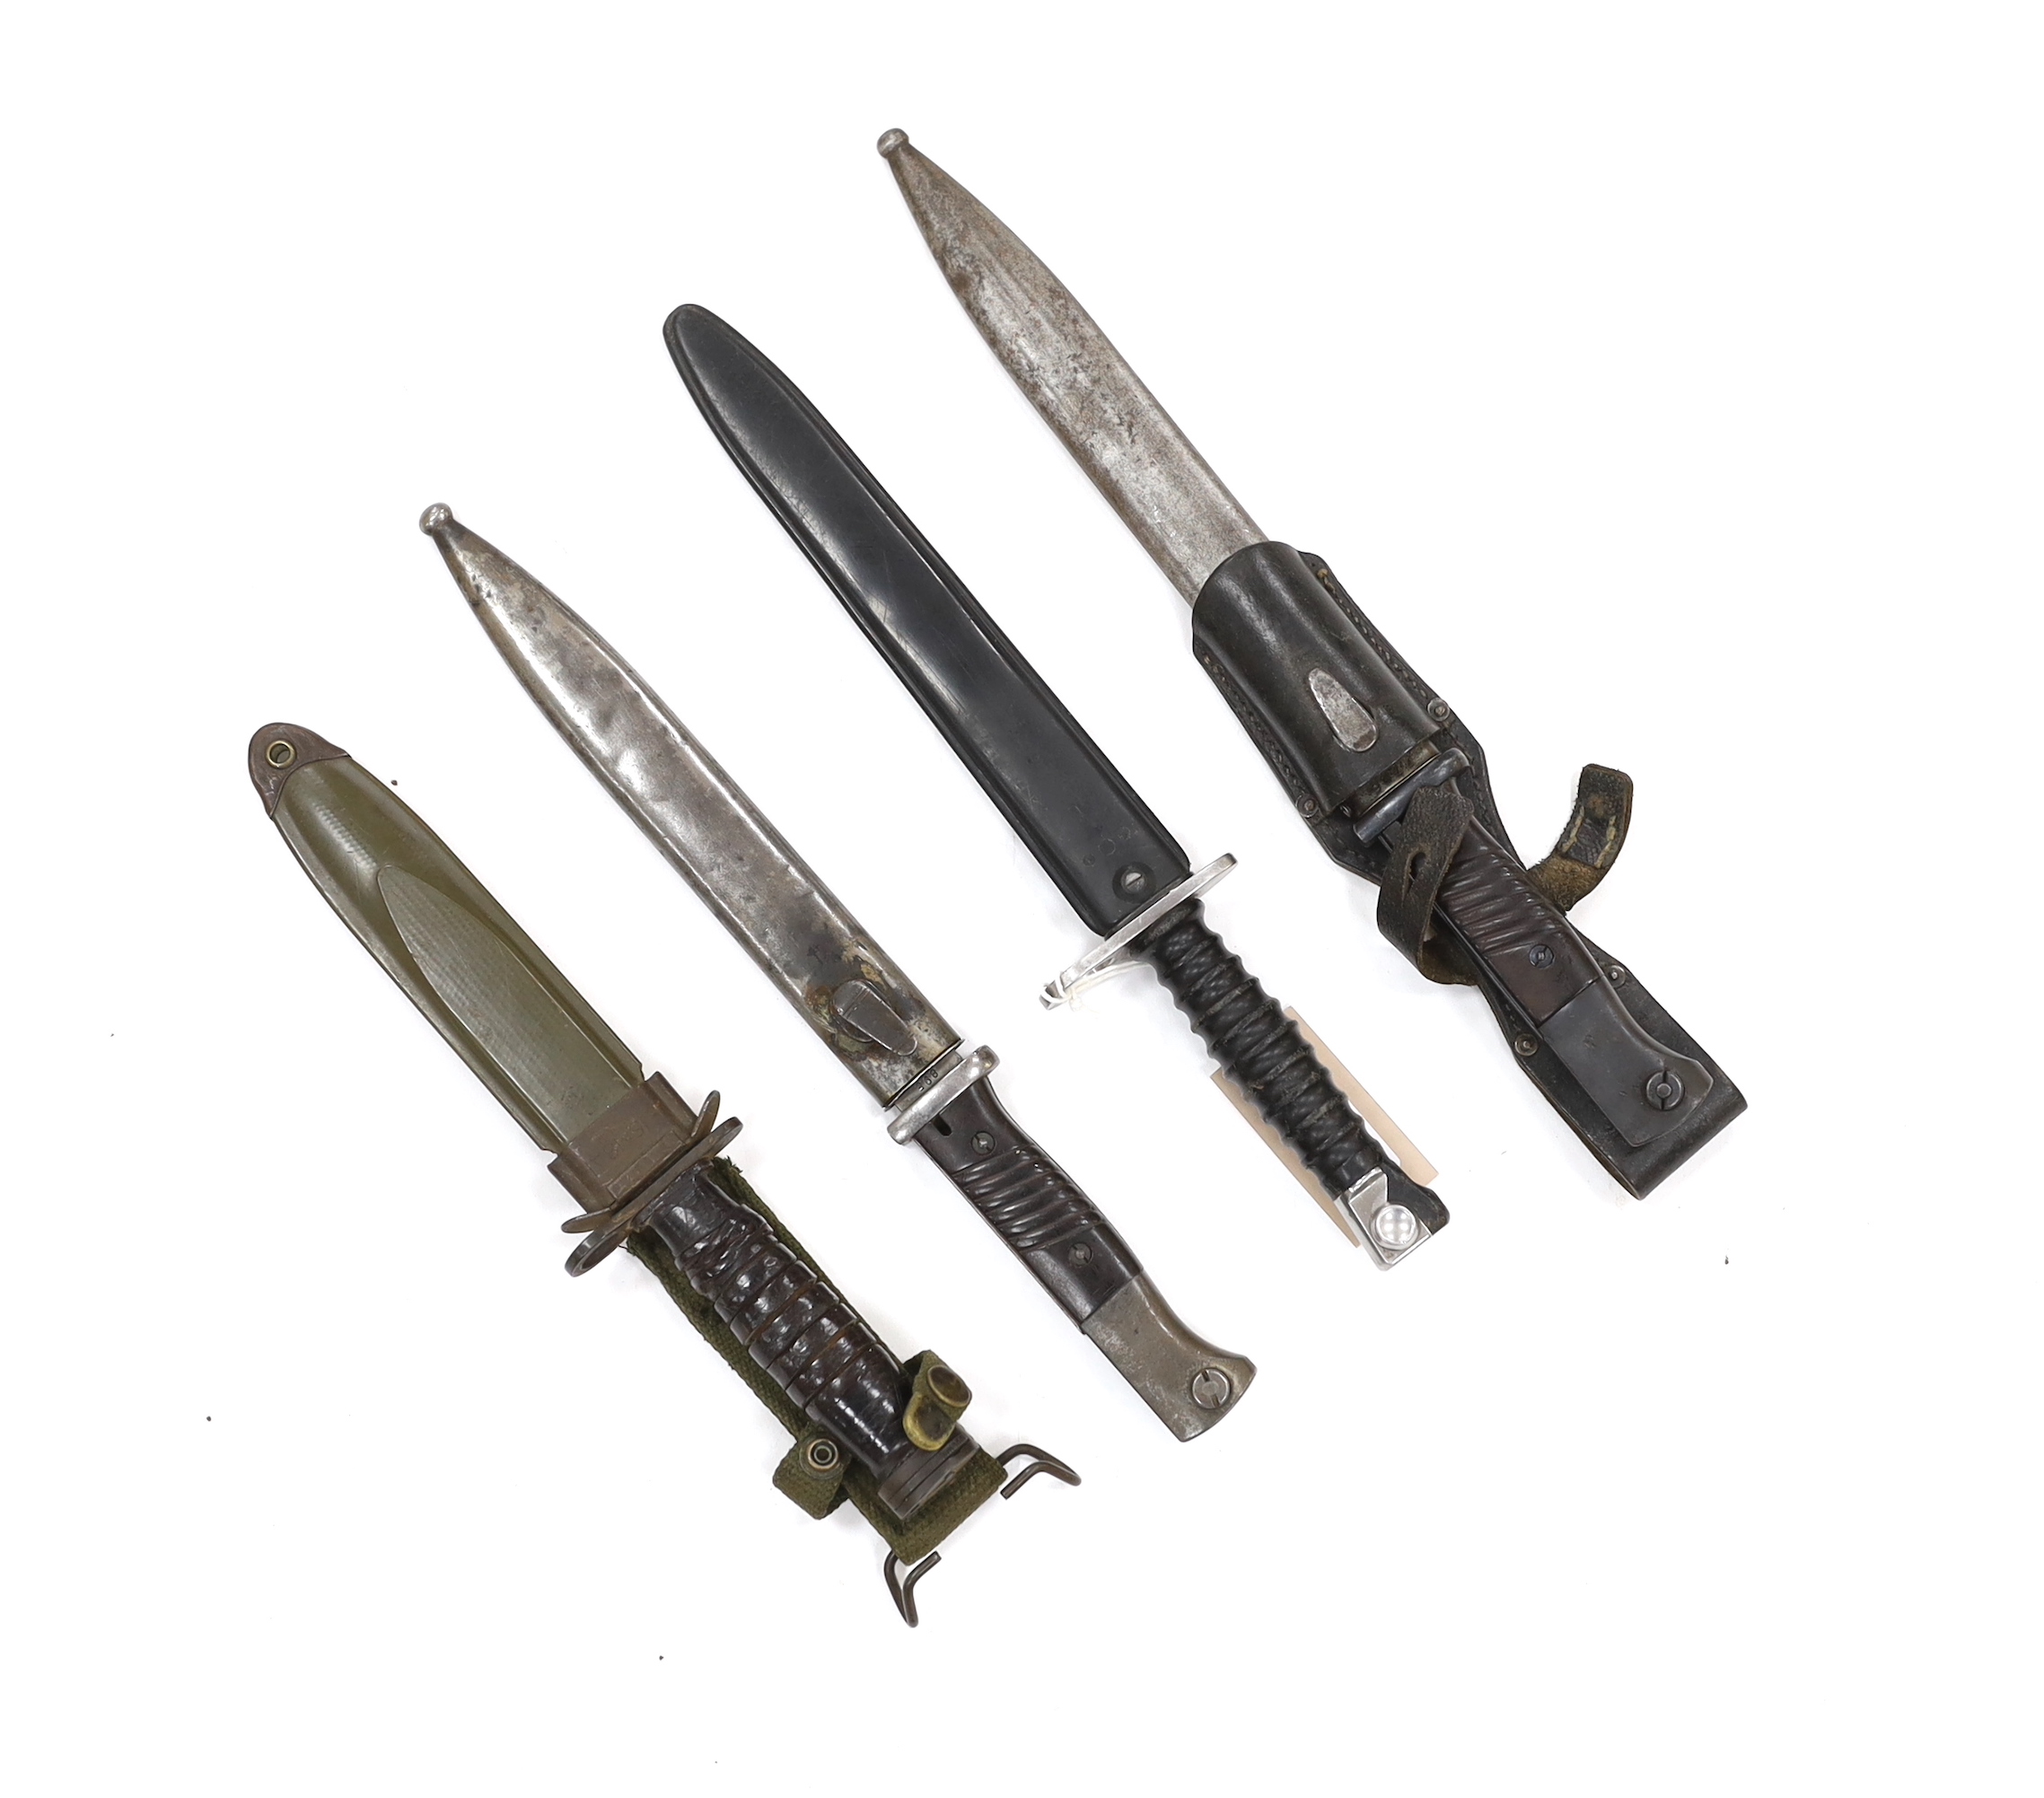 Four bayonets; two Mauser bayonets in scabbards, an American M8A1 carbine bayonet in a scabbard, and another